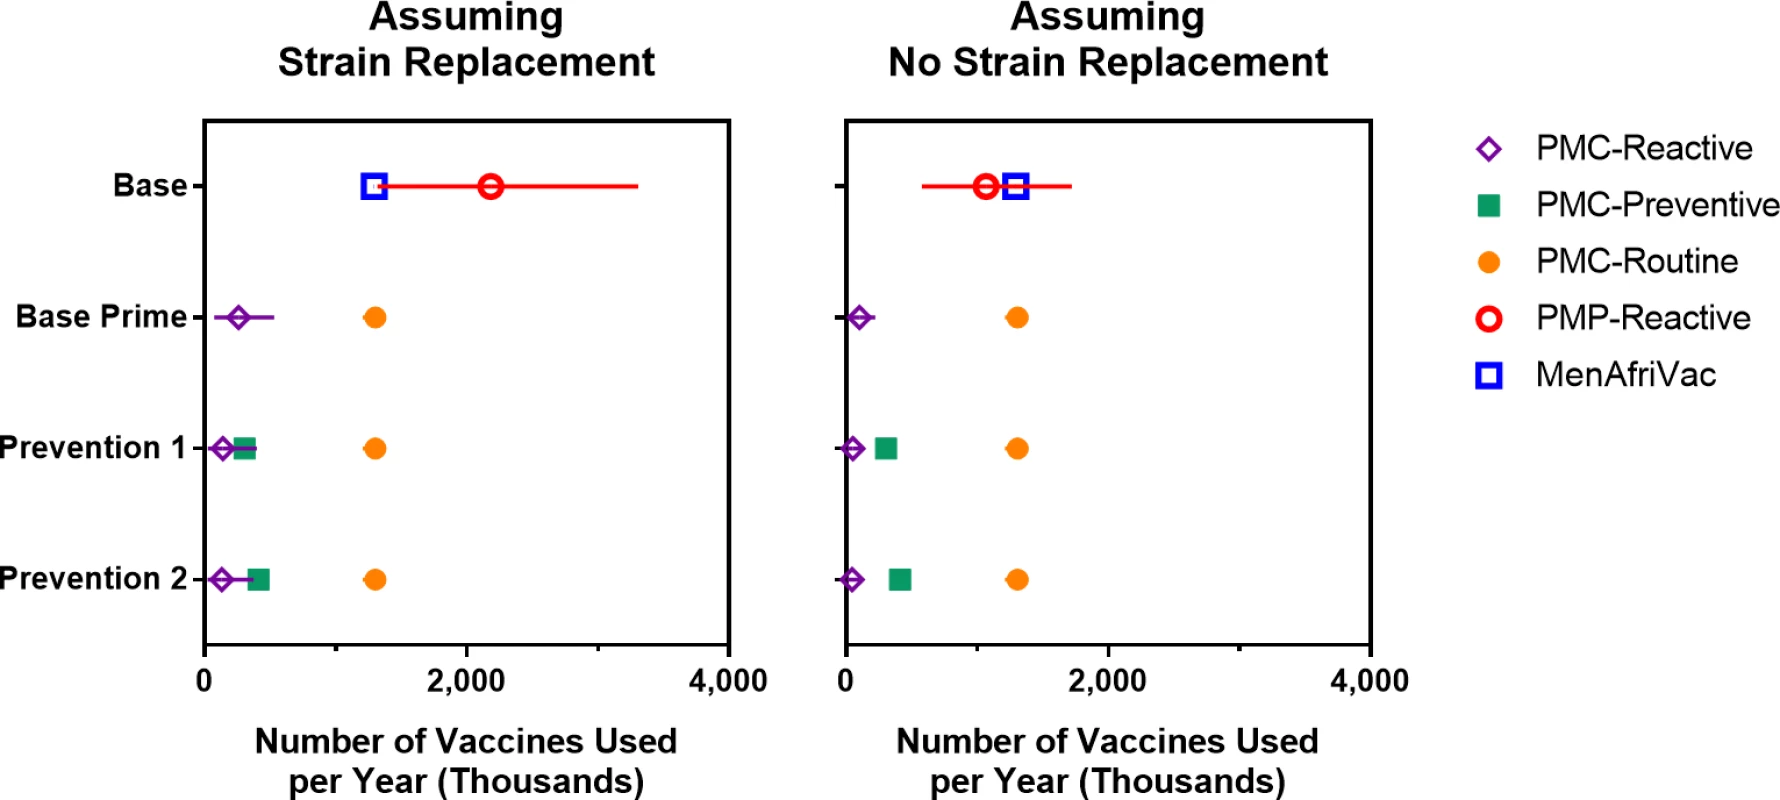 Expected number of vaccines used per year (over a 30-year simulation period) for scenarios with and without strain replacement.